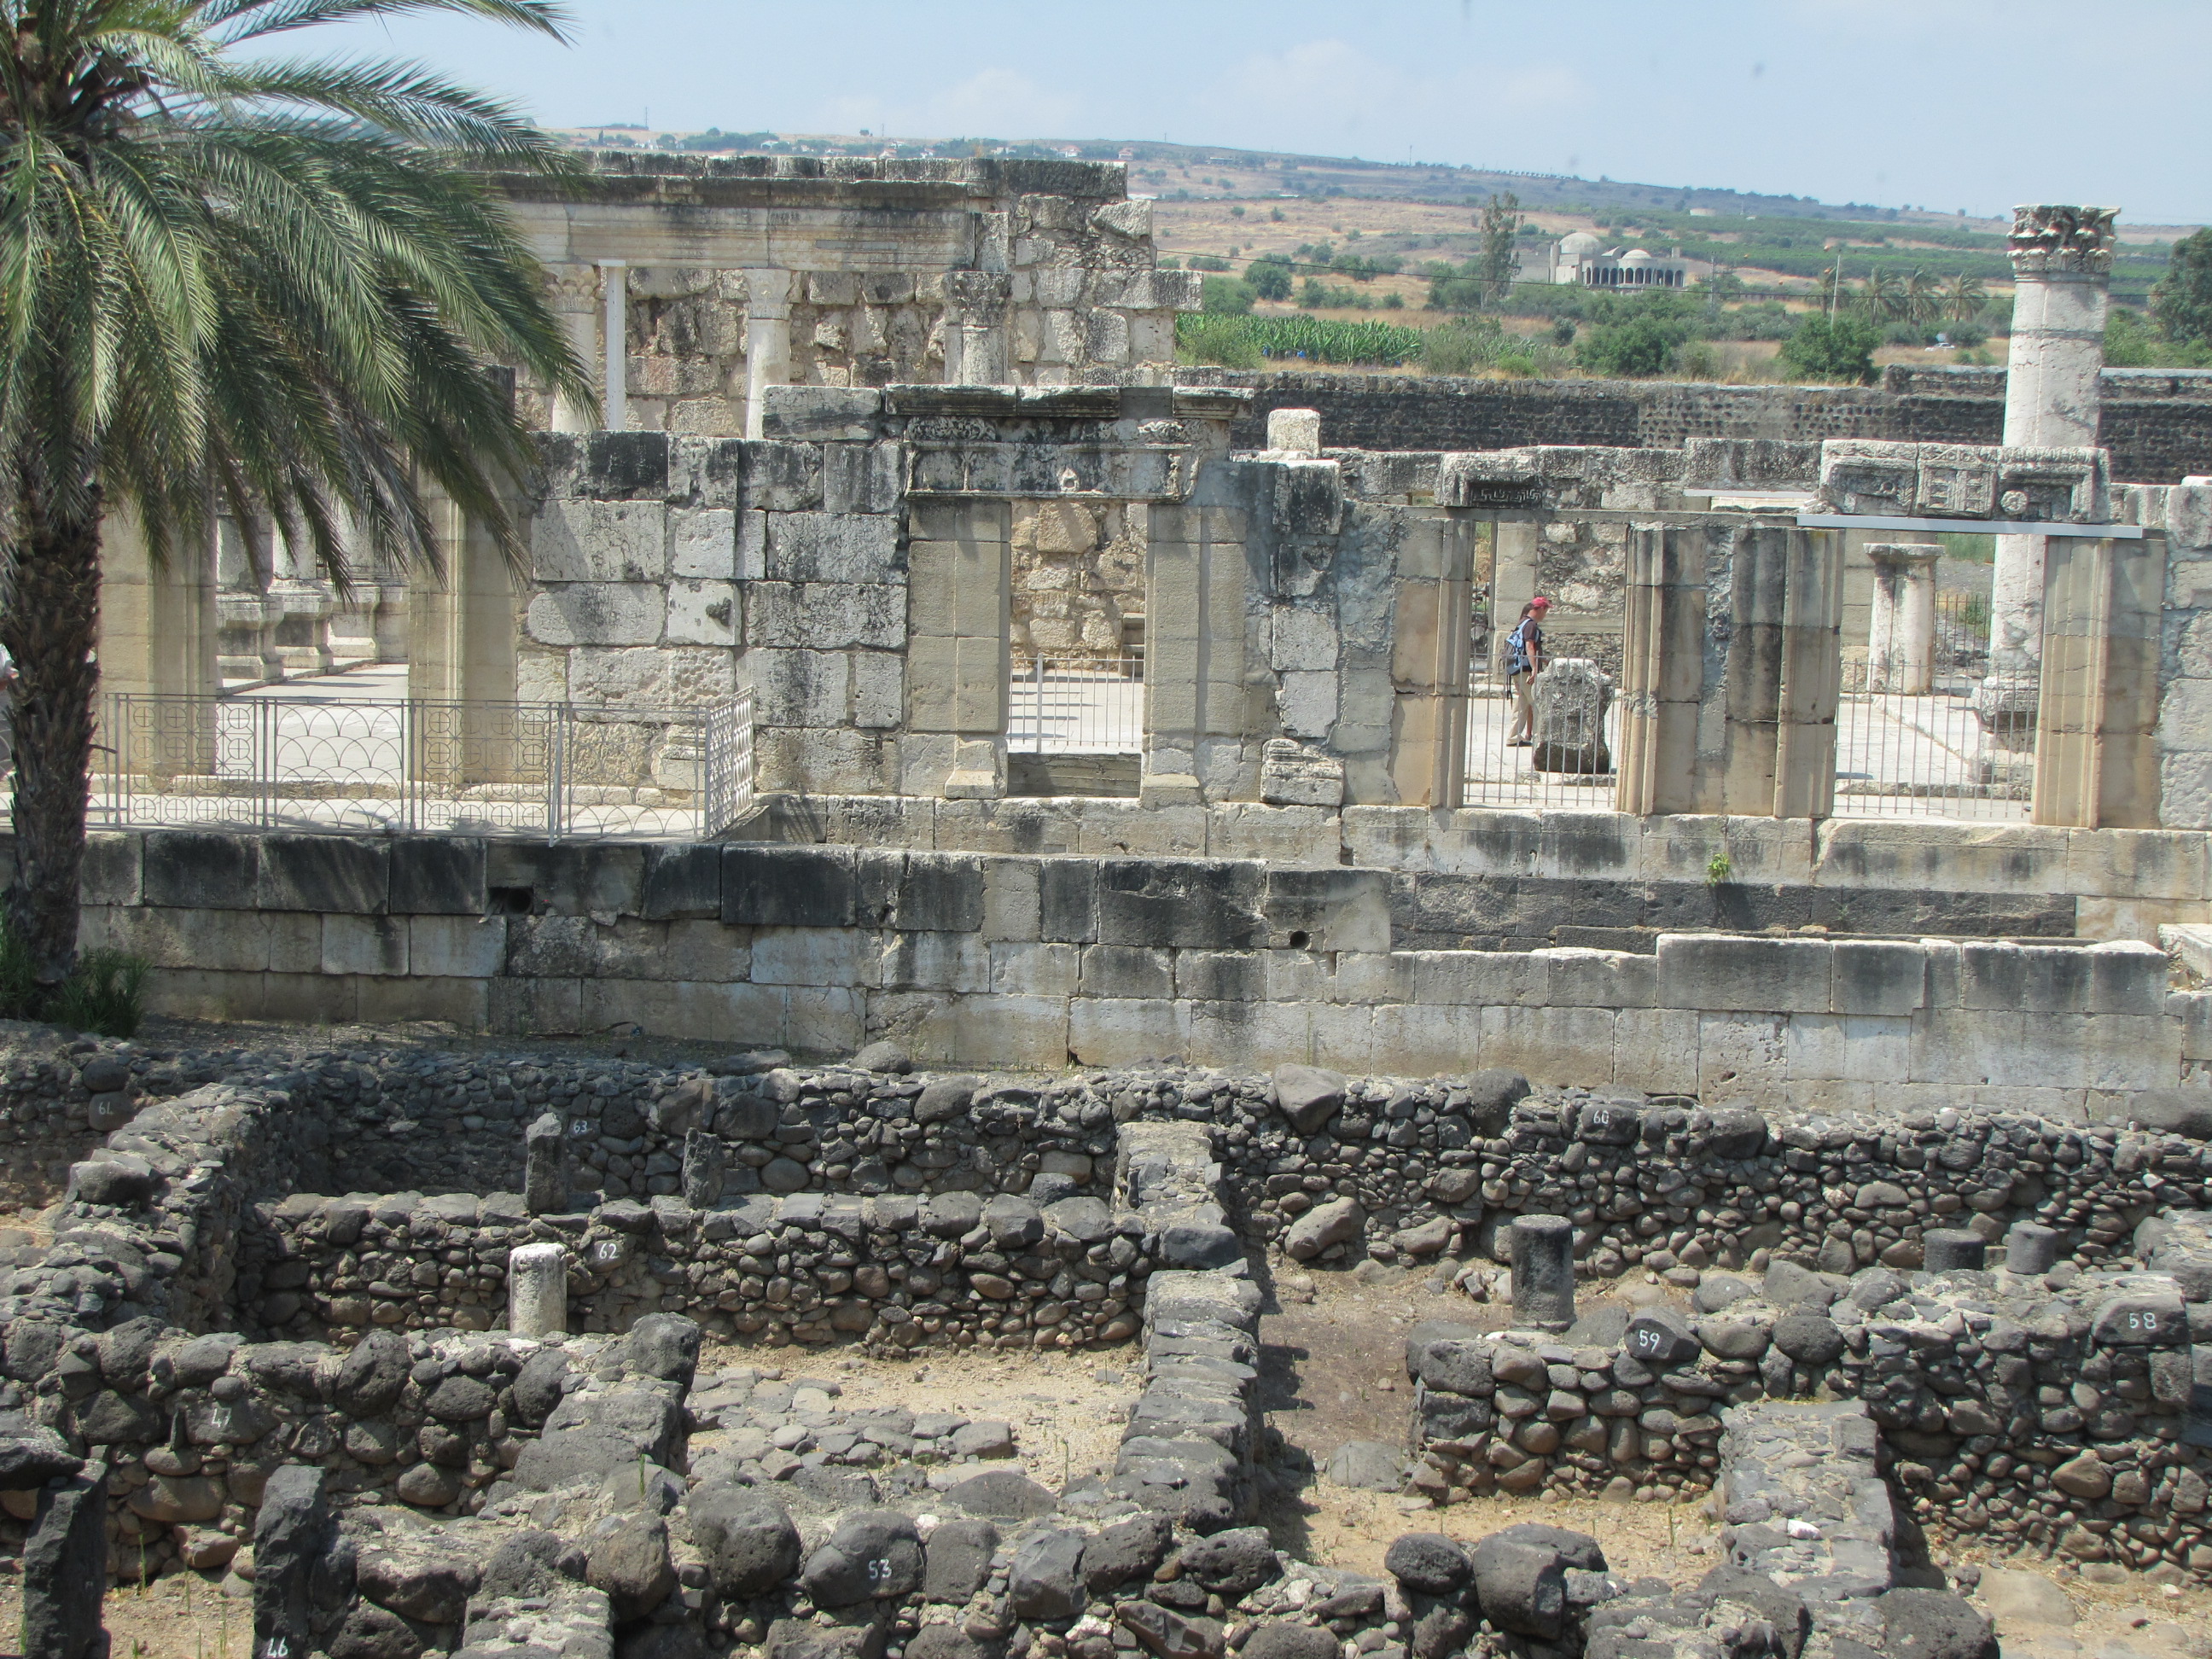 Residential Area of Capernaum looking across homes from Peter's house at the Synagogue in Capernaum